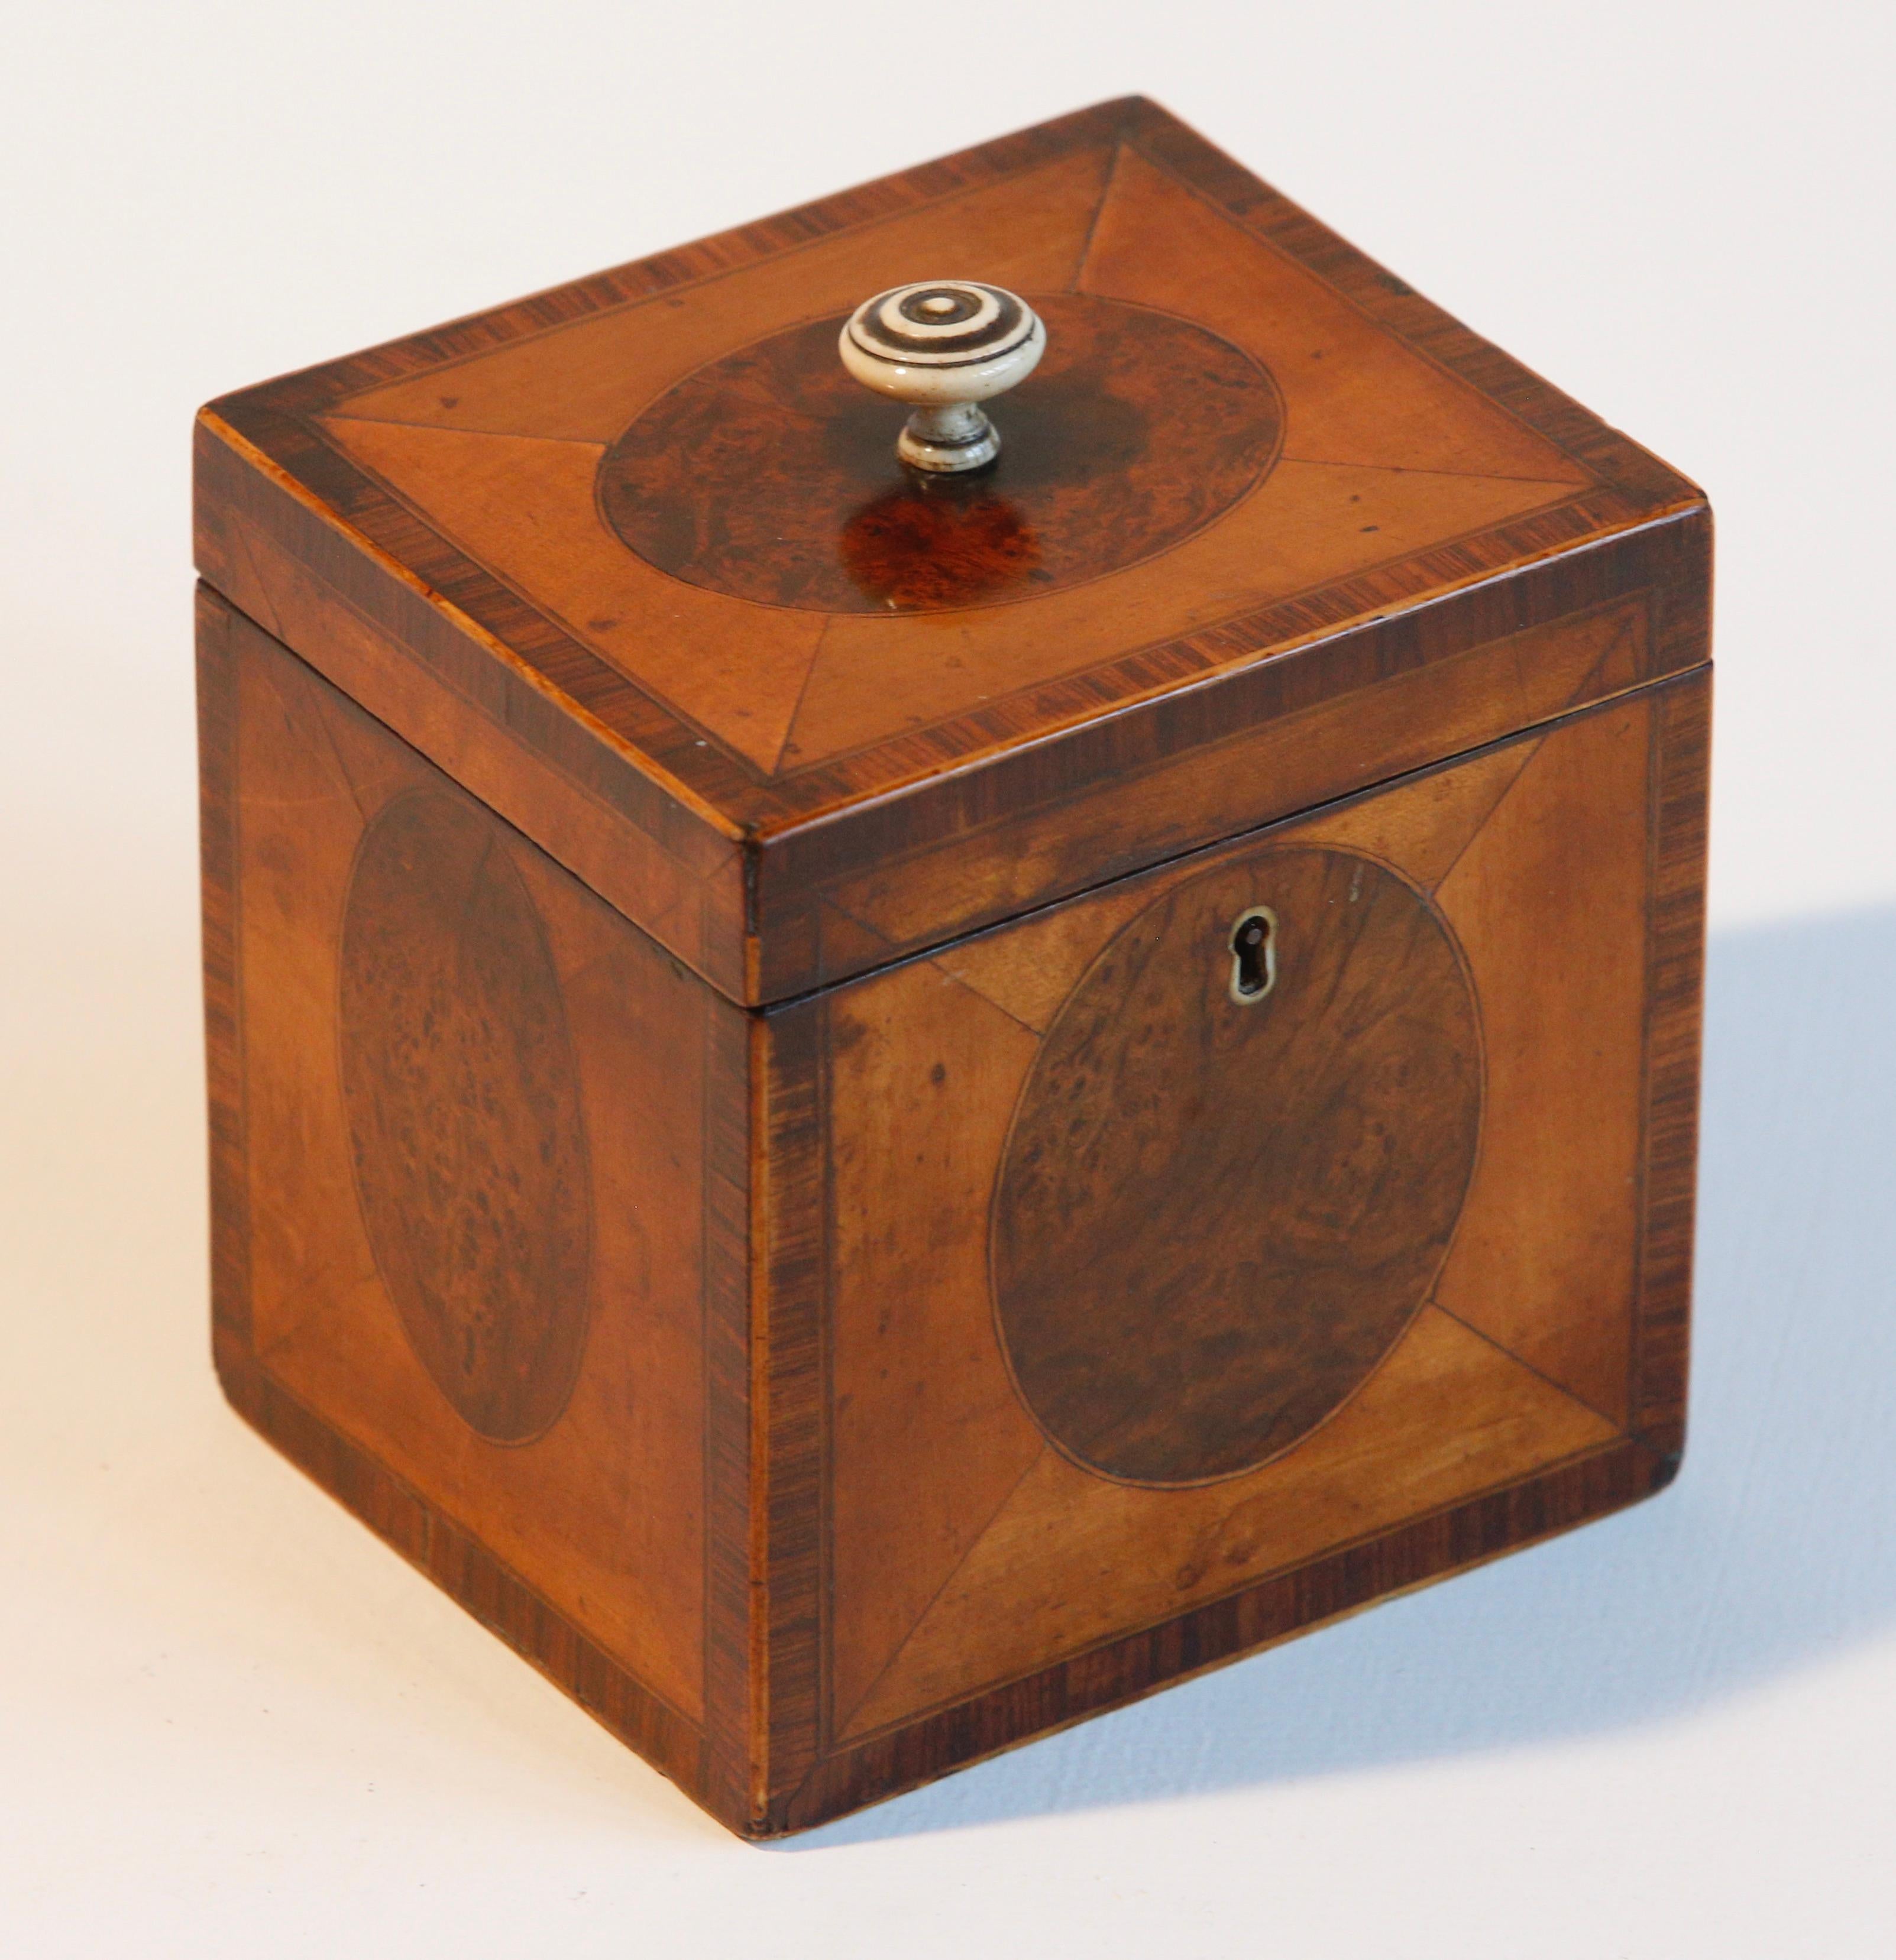 A fine 18th century satinwood and yew tea caddy, the oval burr panels figuring on all sides with boxwood banding and bone knob to the lid. Wonderful patination and remnants of silver paper on the inside.
           
